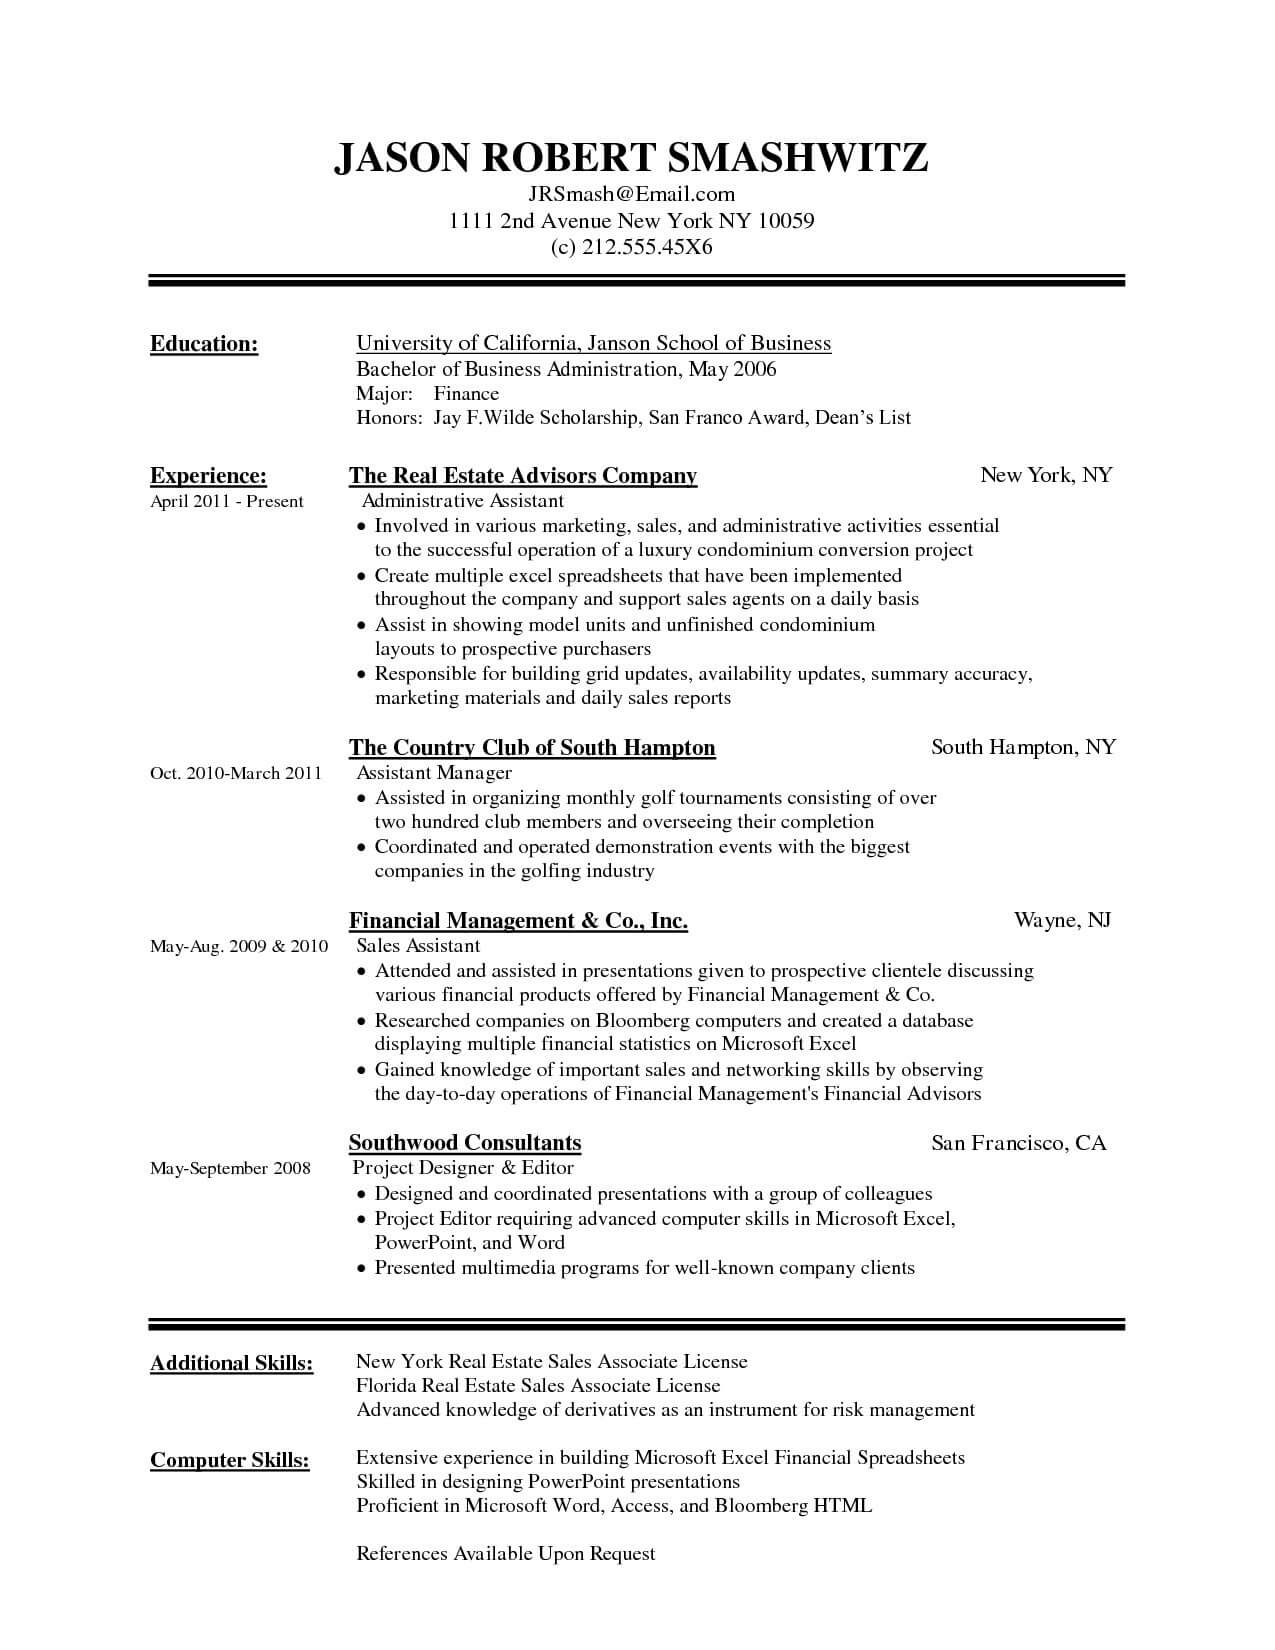 Awesome Resume Templates For Word 2010 – Superkepo Intended For Resume Templates Word 2010